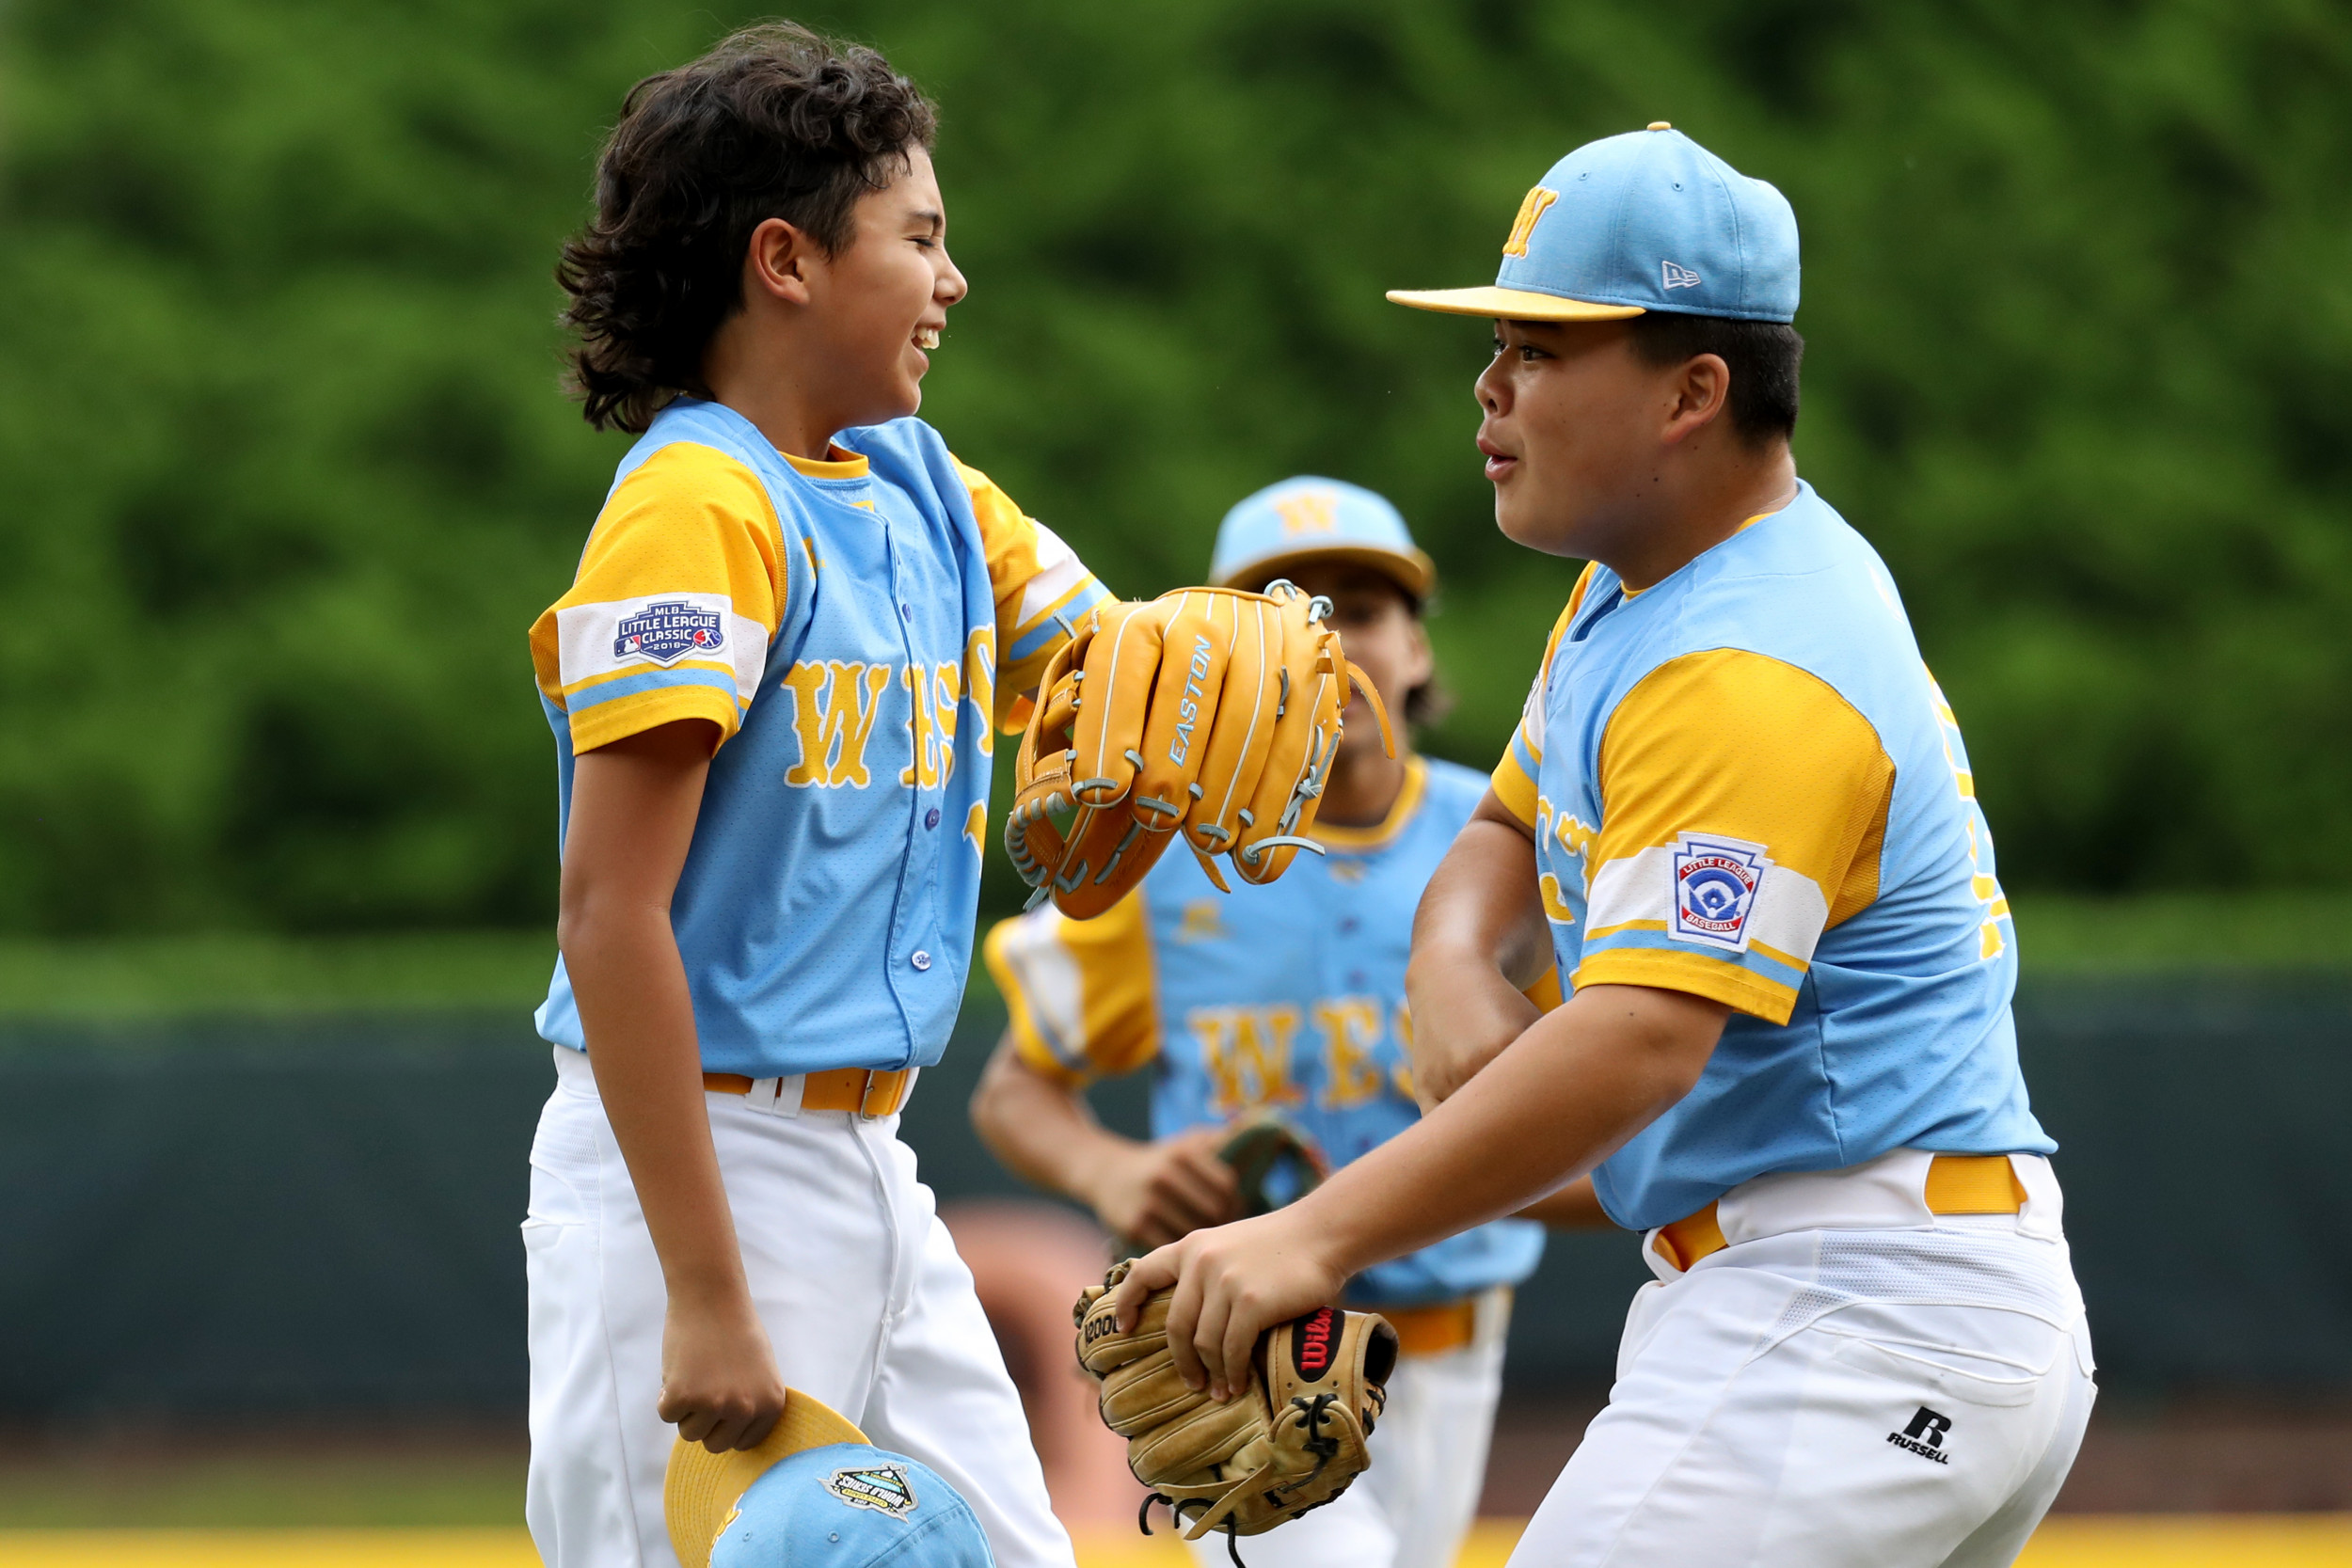 2019 Little League World Series Dates, TV Channels, Live Stream, Schedule and Odds